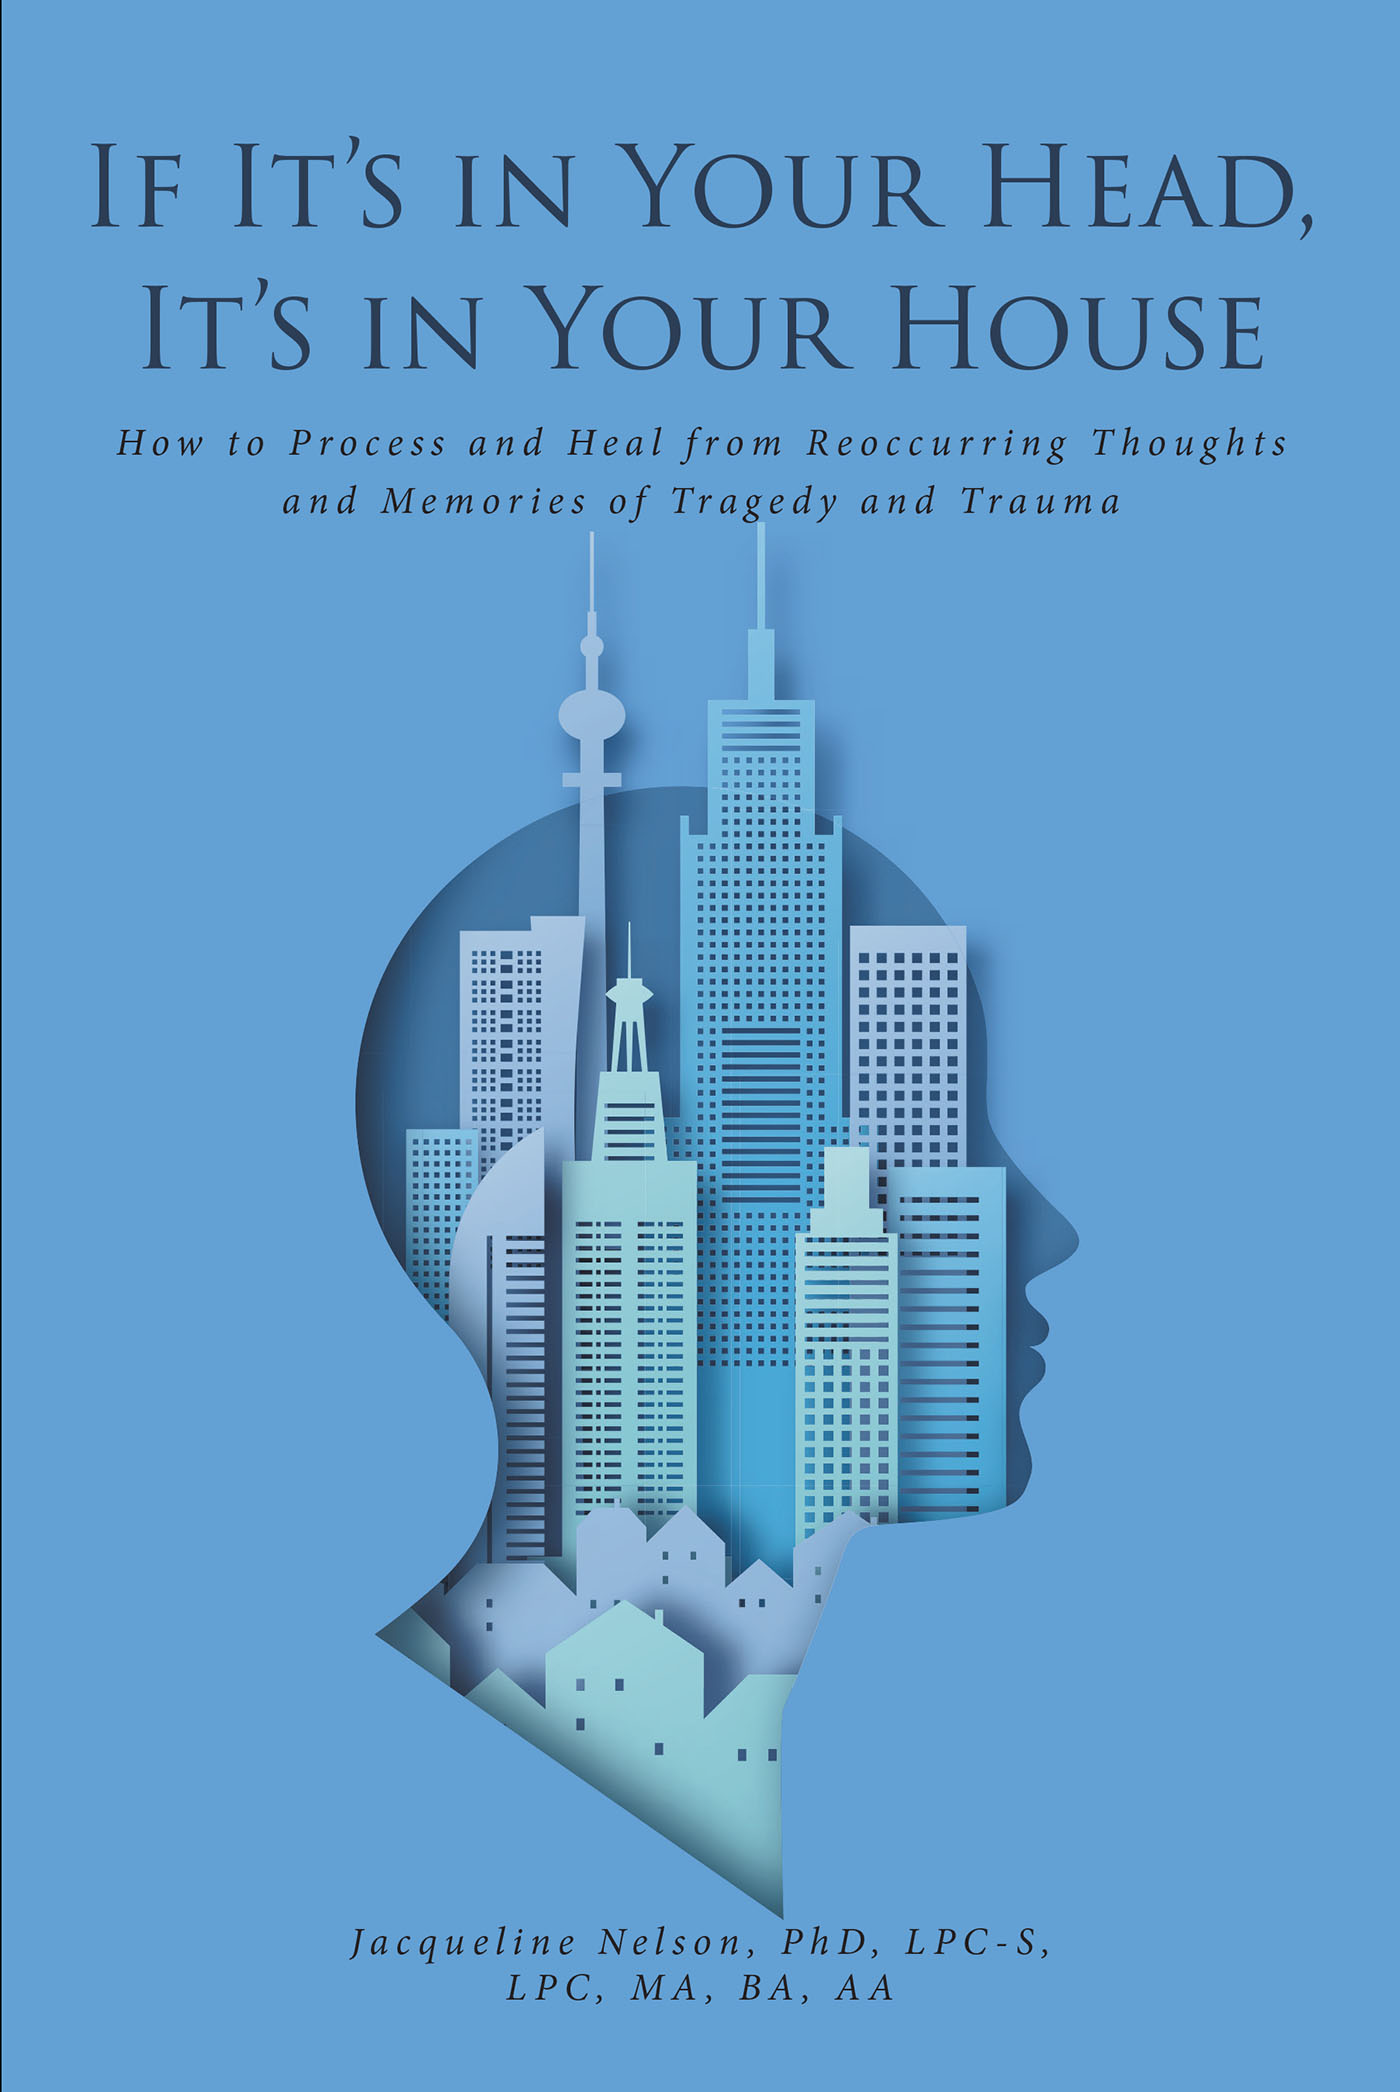 Jacqueline Nelson, PhD, LPC-S, LPC, MA, BA, AA’s New Book, “If It's in Your Head, It's in Your House,” is a Powerful Tool for Readers to Heal from Memories of Past Trauma